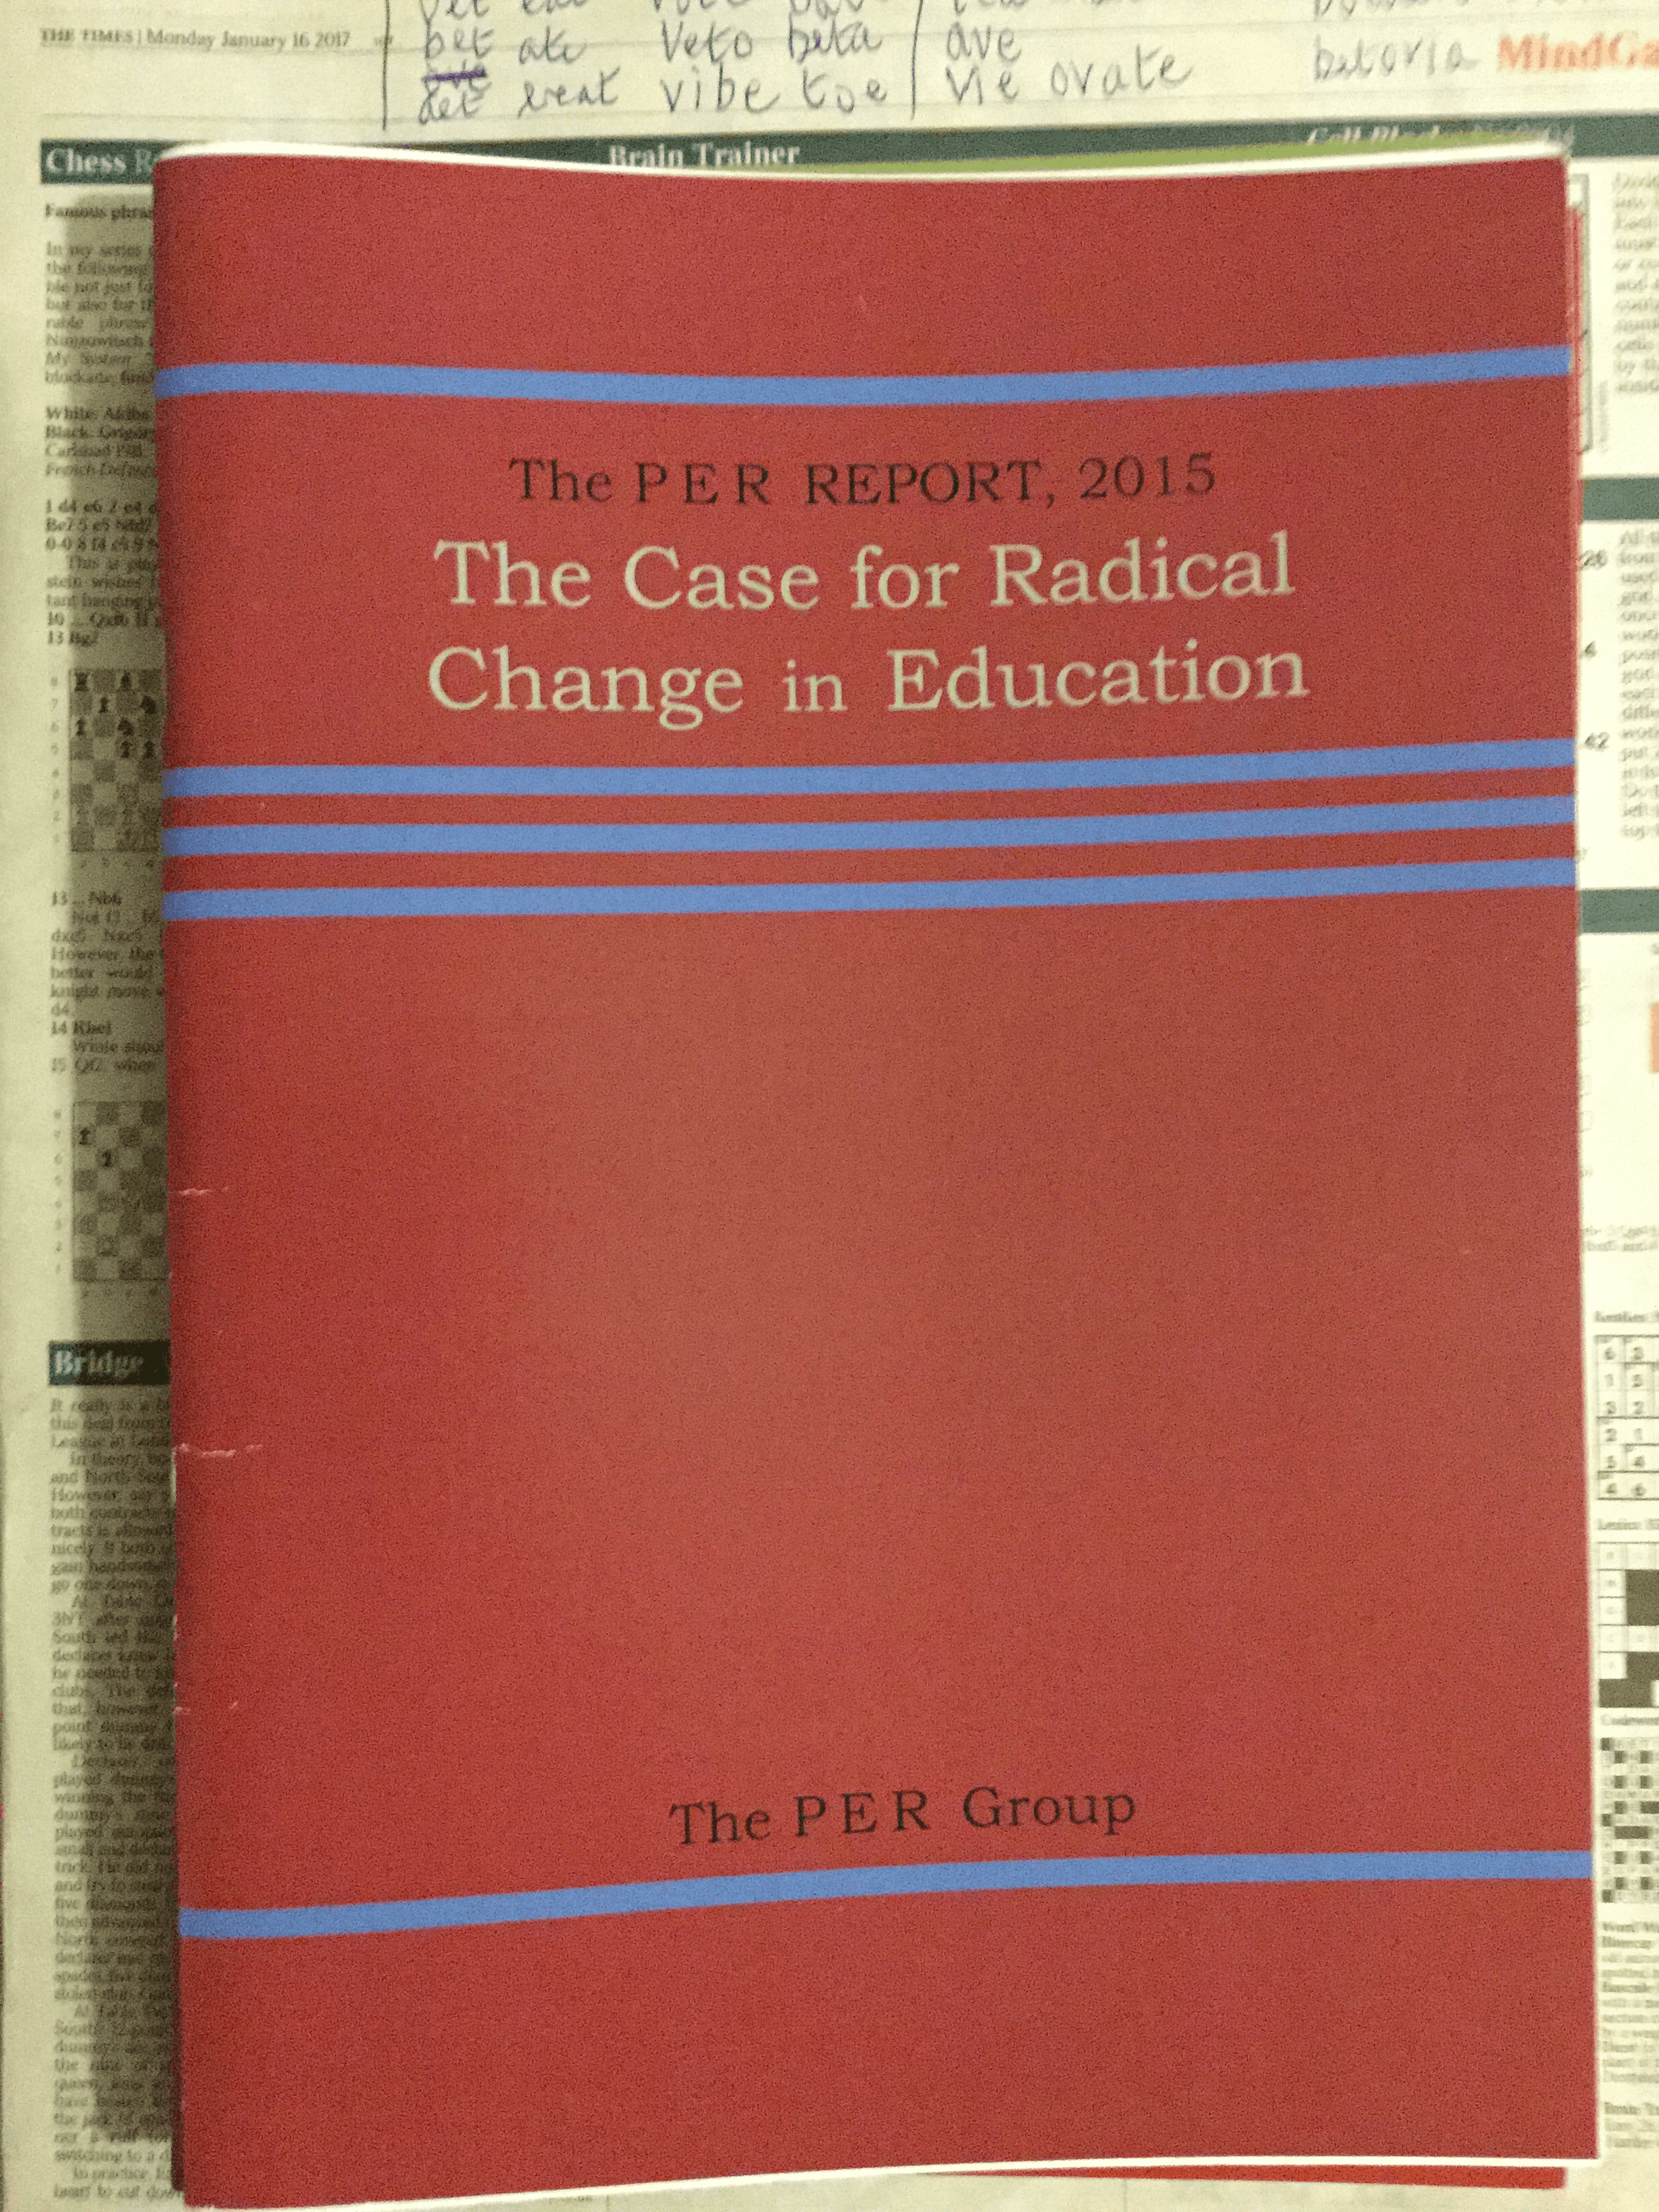 book with a red cover